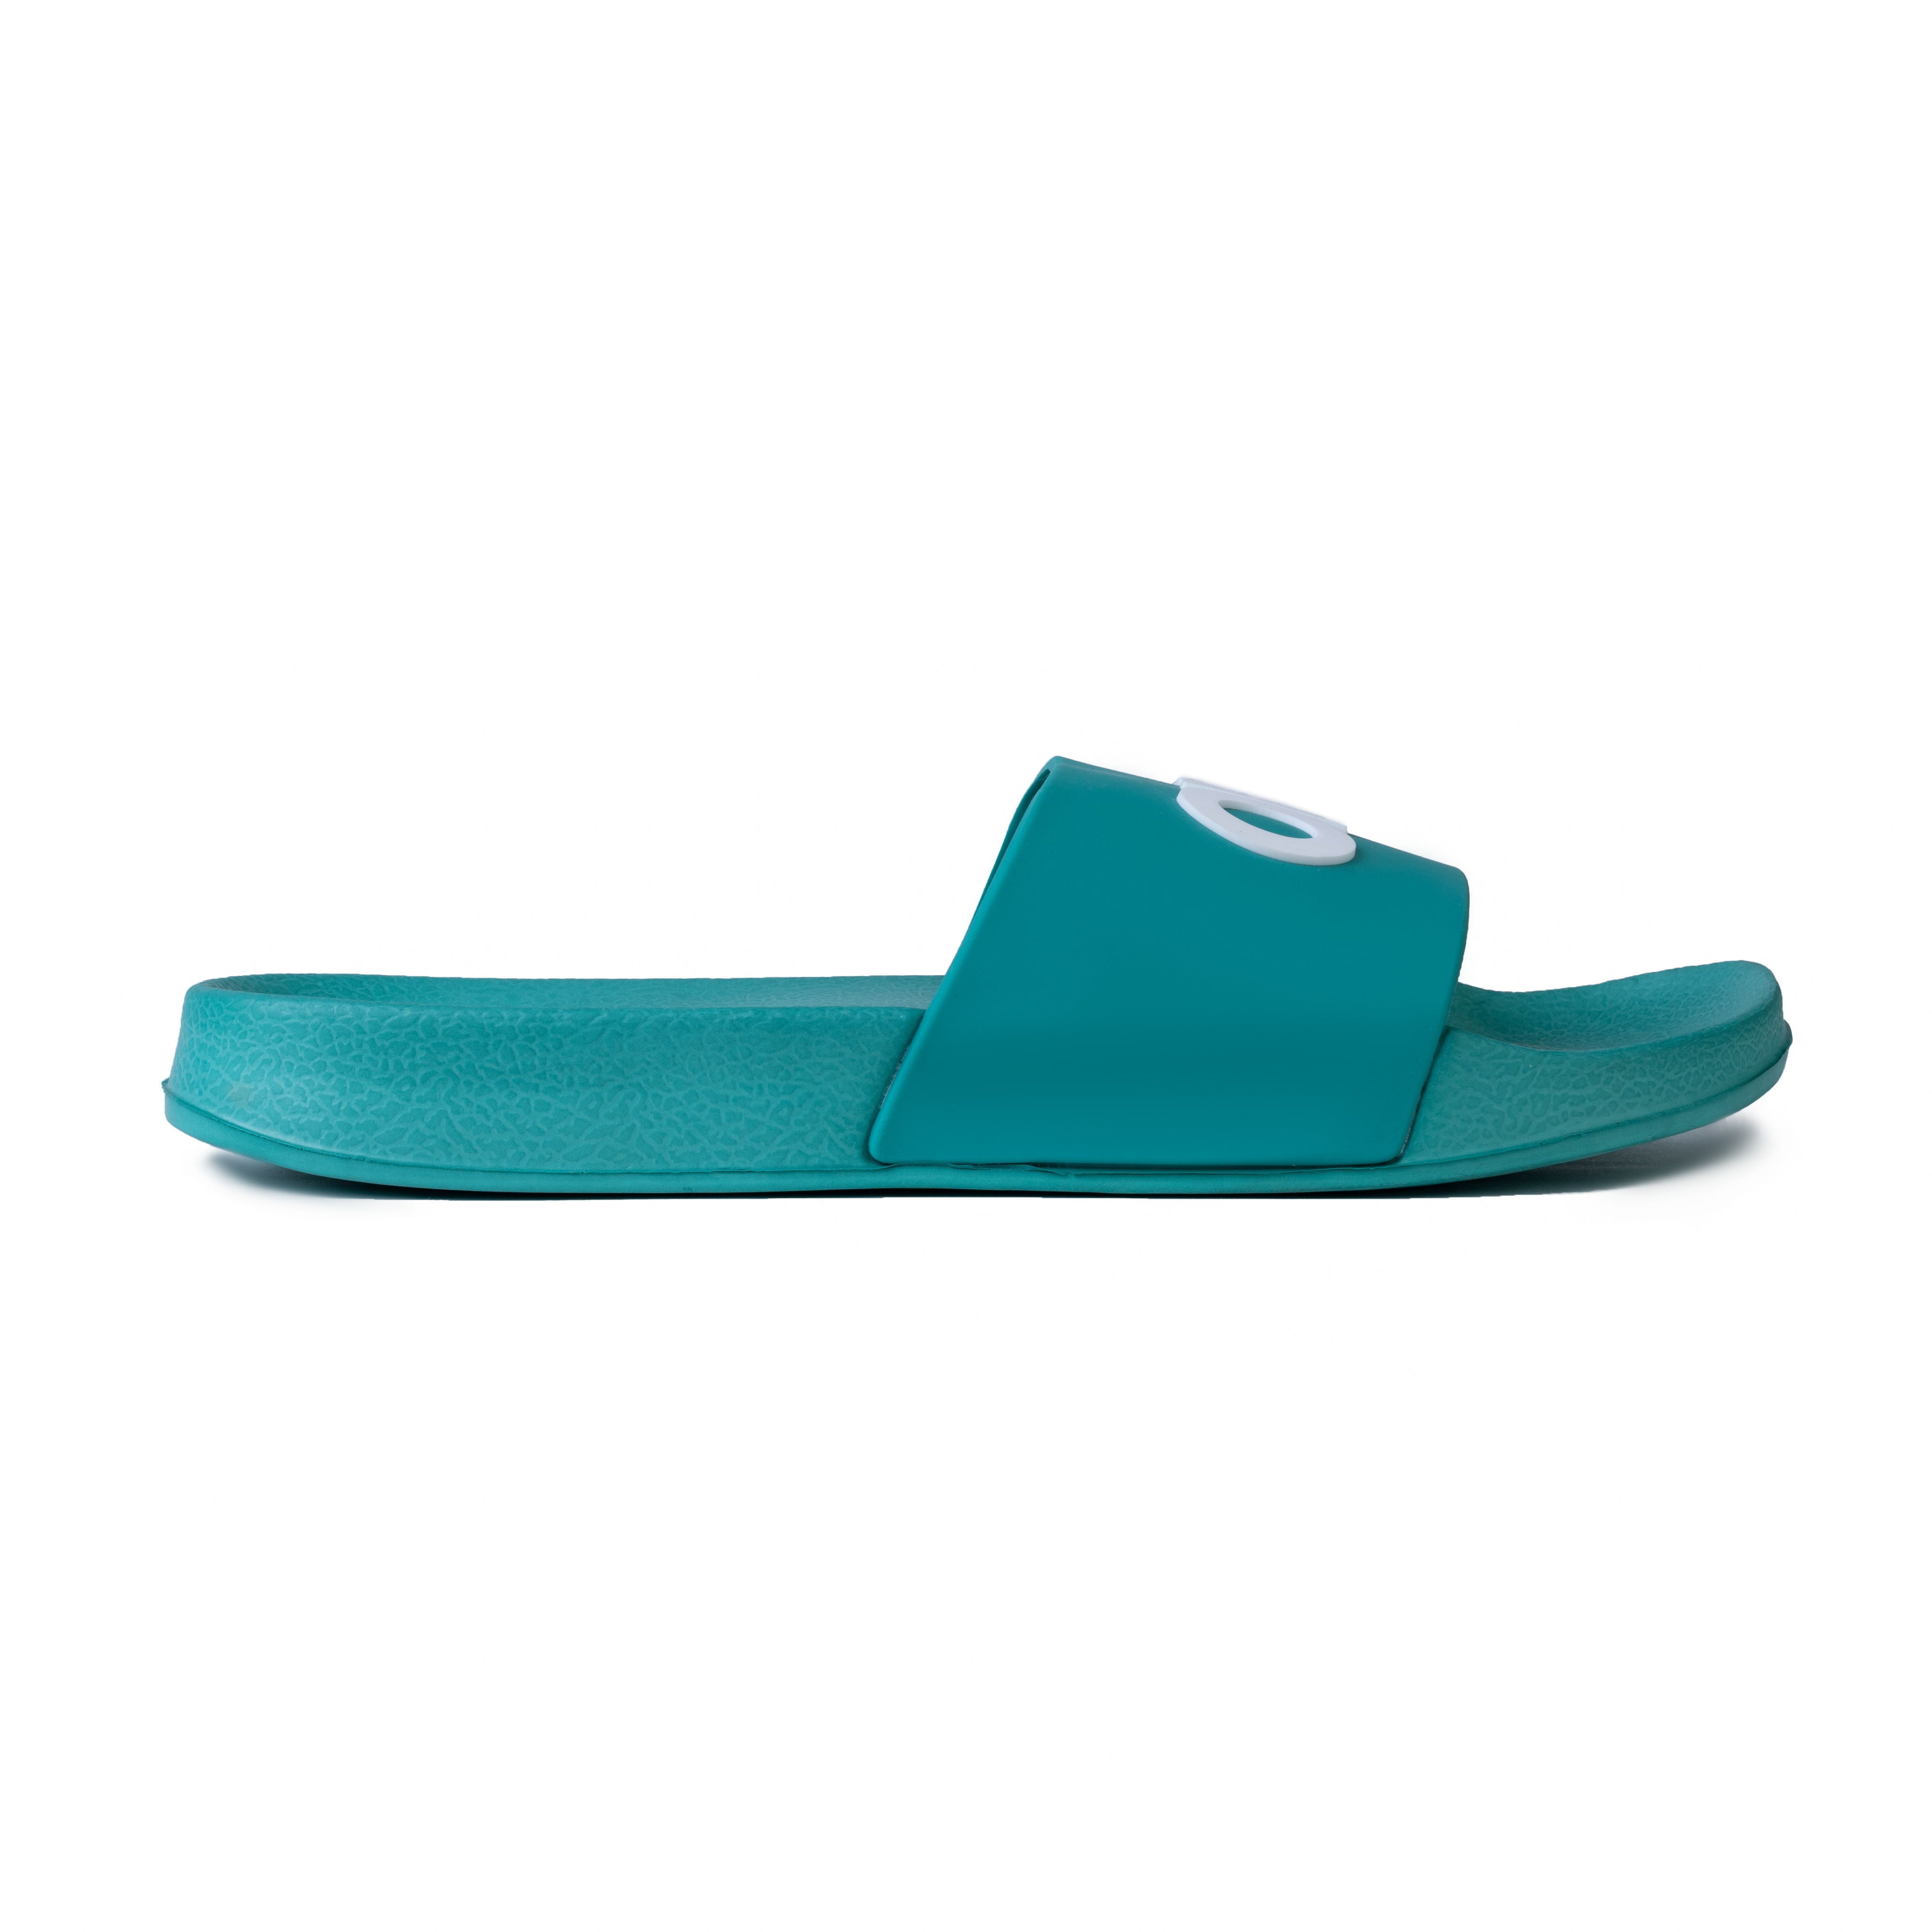 Buy affordable mens slippers online in pakistan 